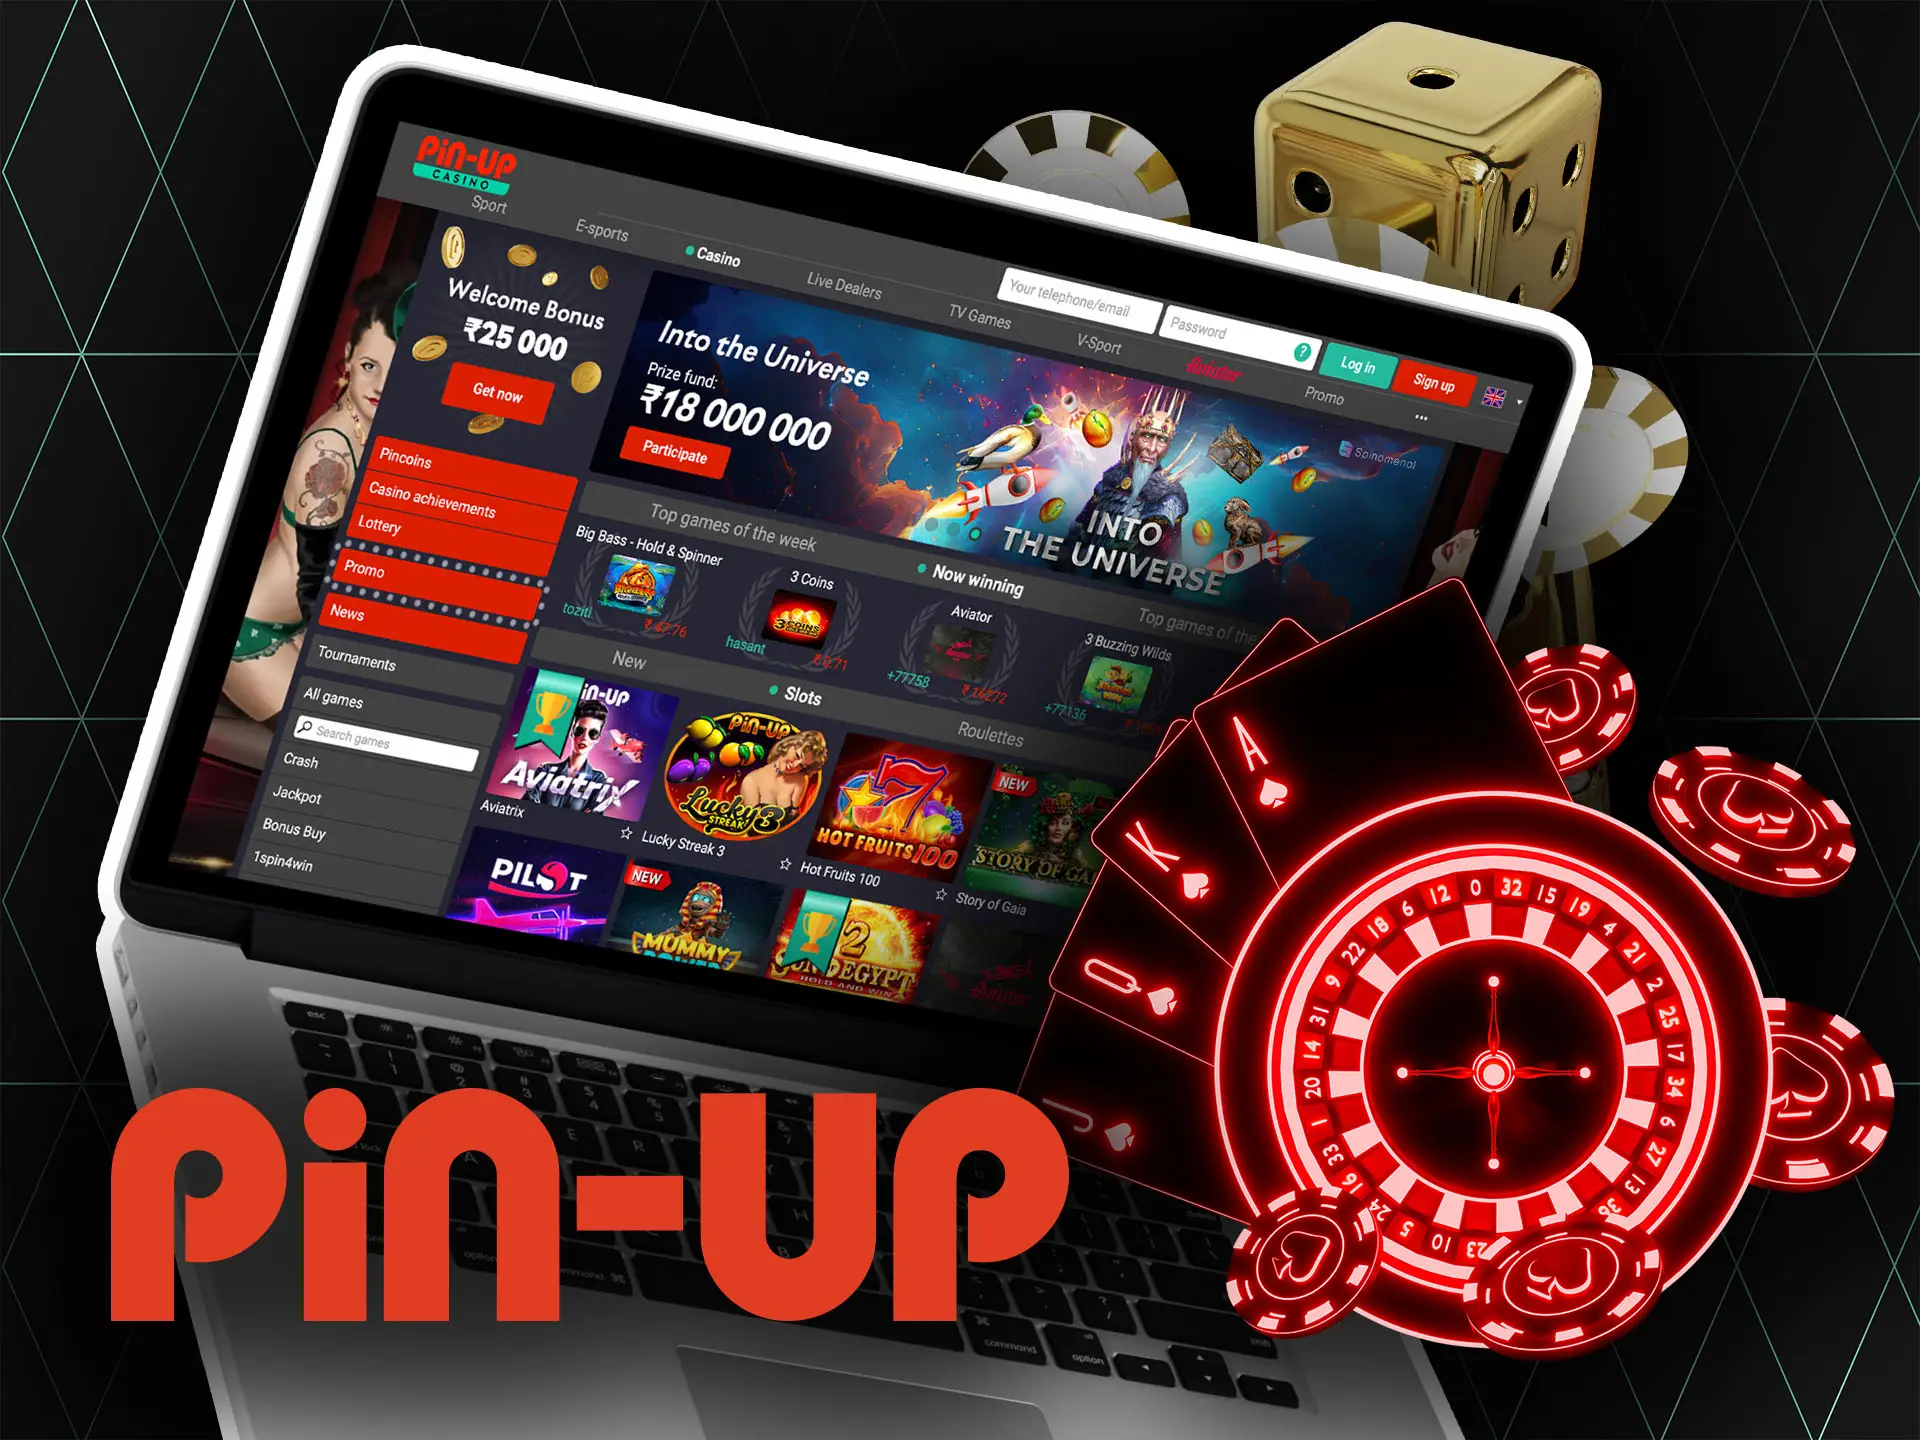 Pin Up casino offers you lots of games like slots, table games, lotteries and others.